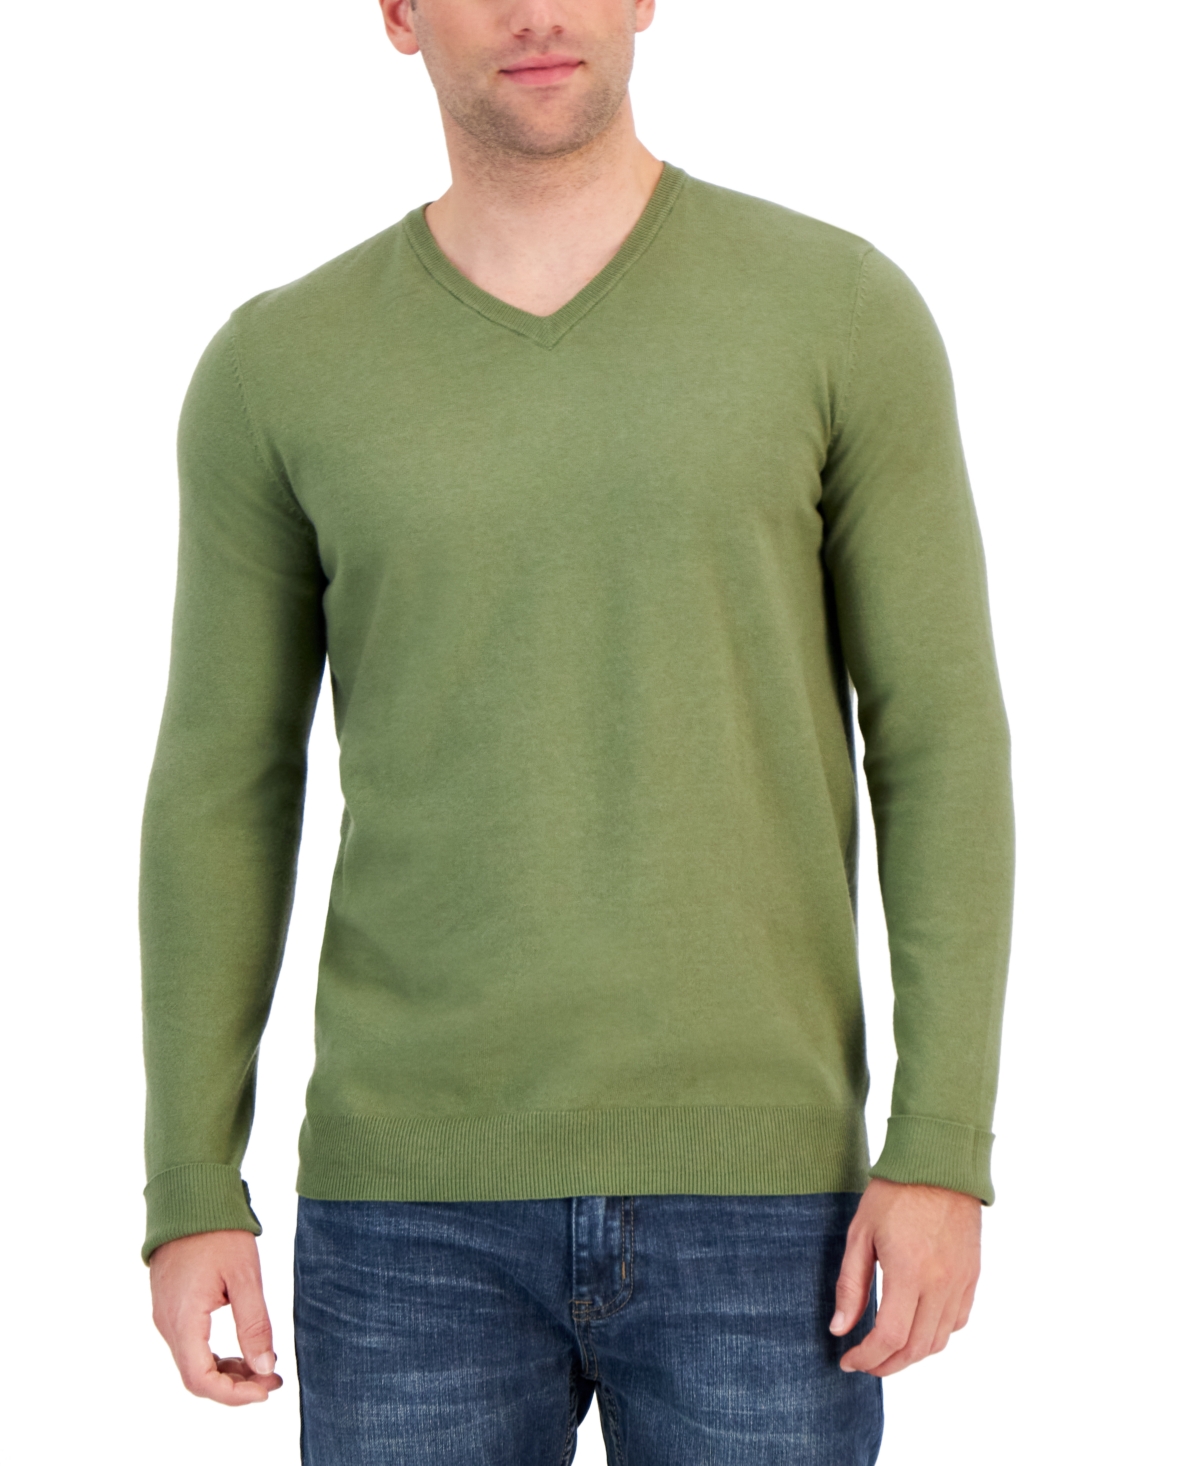 Men's Solid V-Neck Cotton Sweater, Created for Macy's - Military Soil